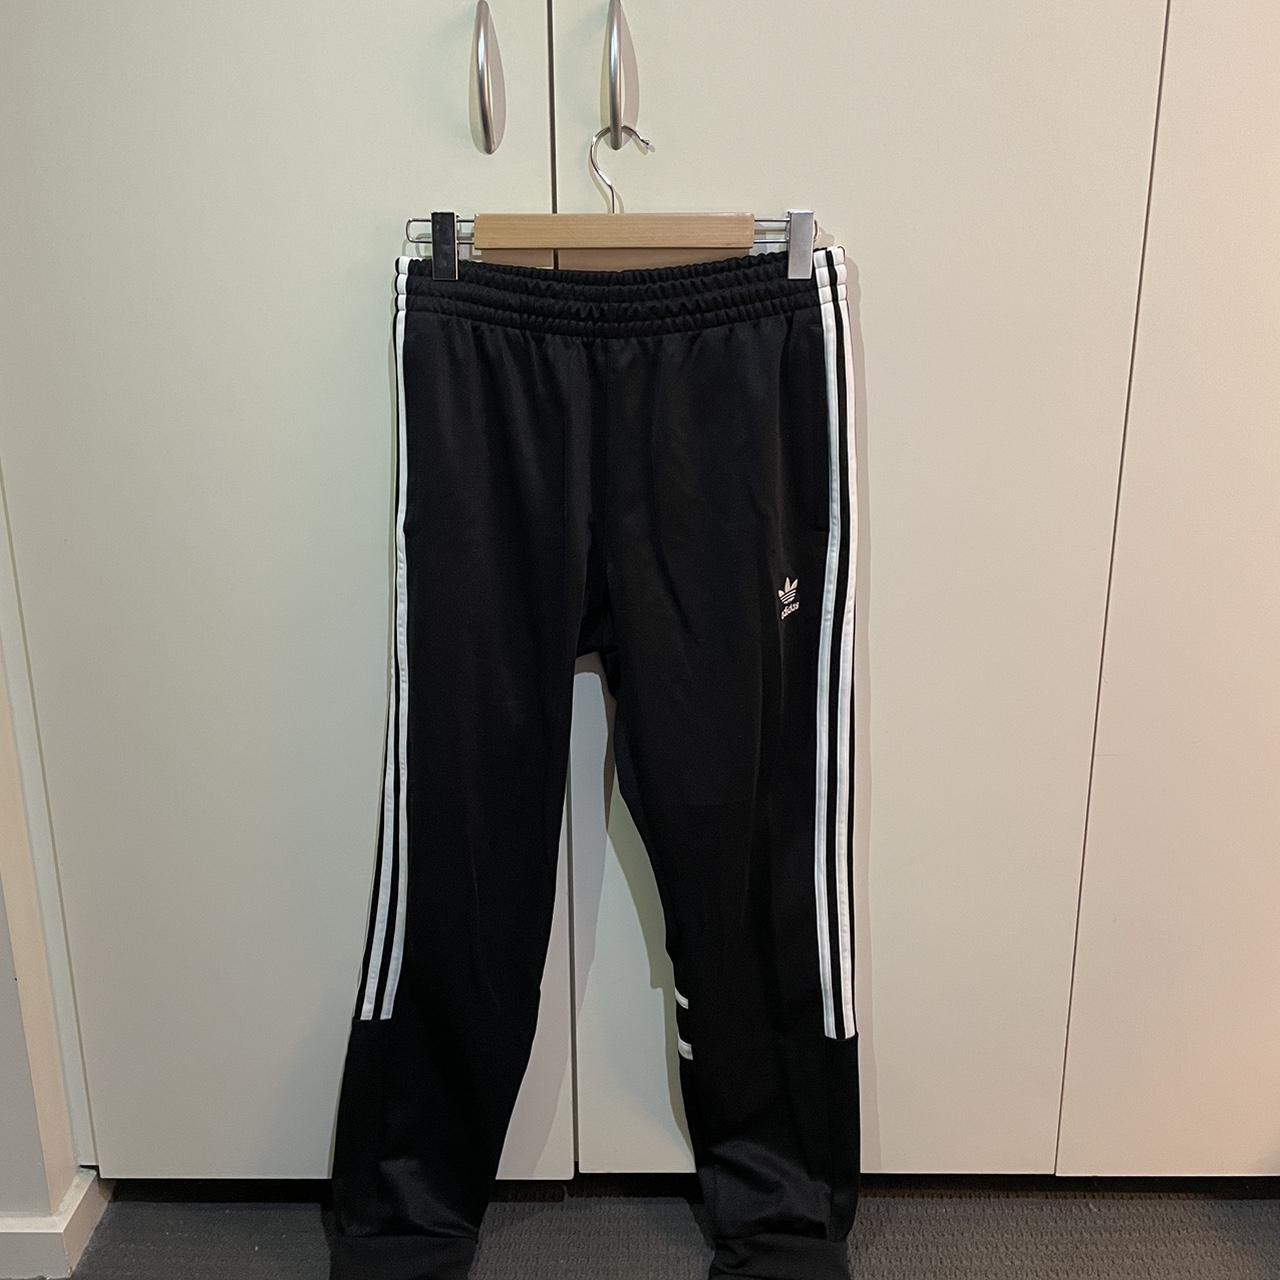 Adidas Track Bottoms Worn once. Was given these as... - Depop